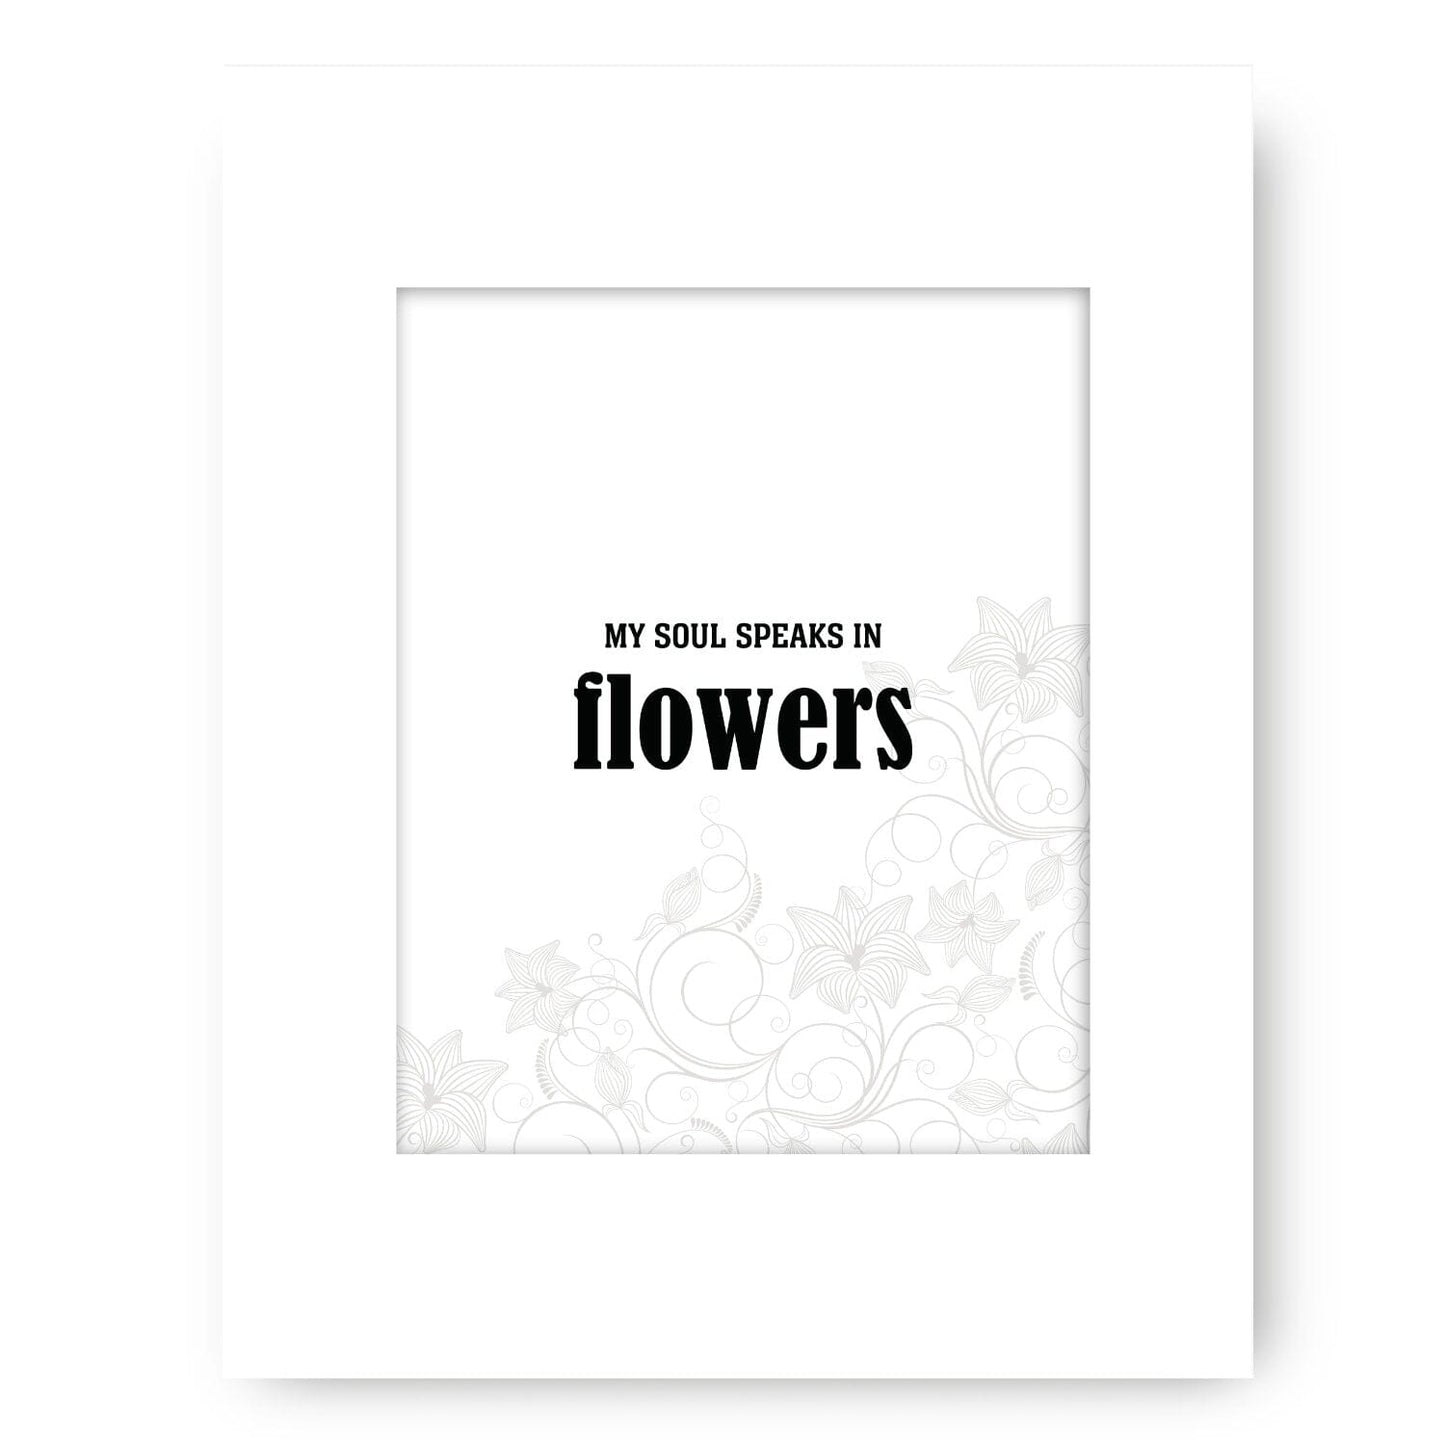 My Soul Speaks in Flowers - Wise and Witty Quote Wall Print Wise and Wiseass Quotes Song Lyrics Art 8x10 White Matted Print 